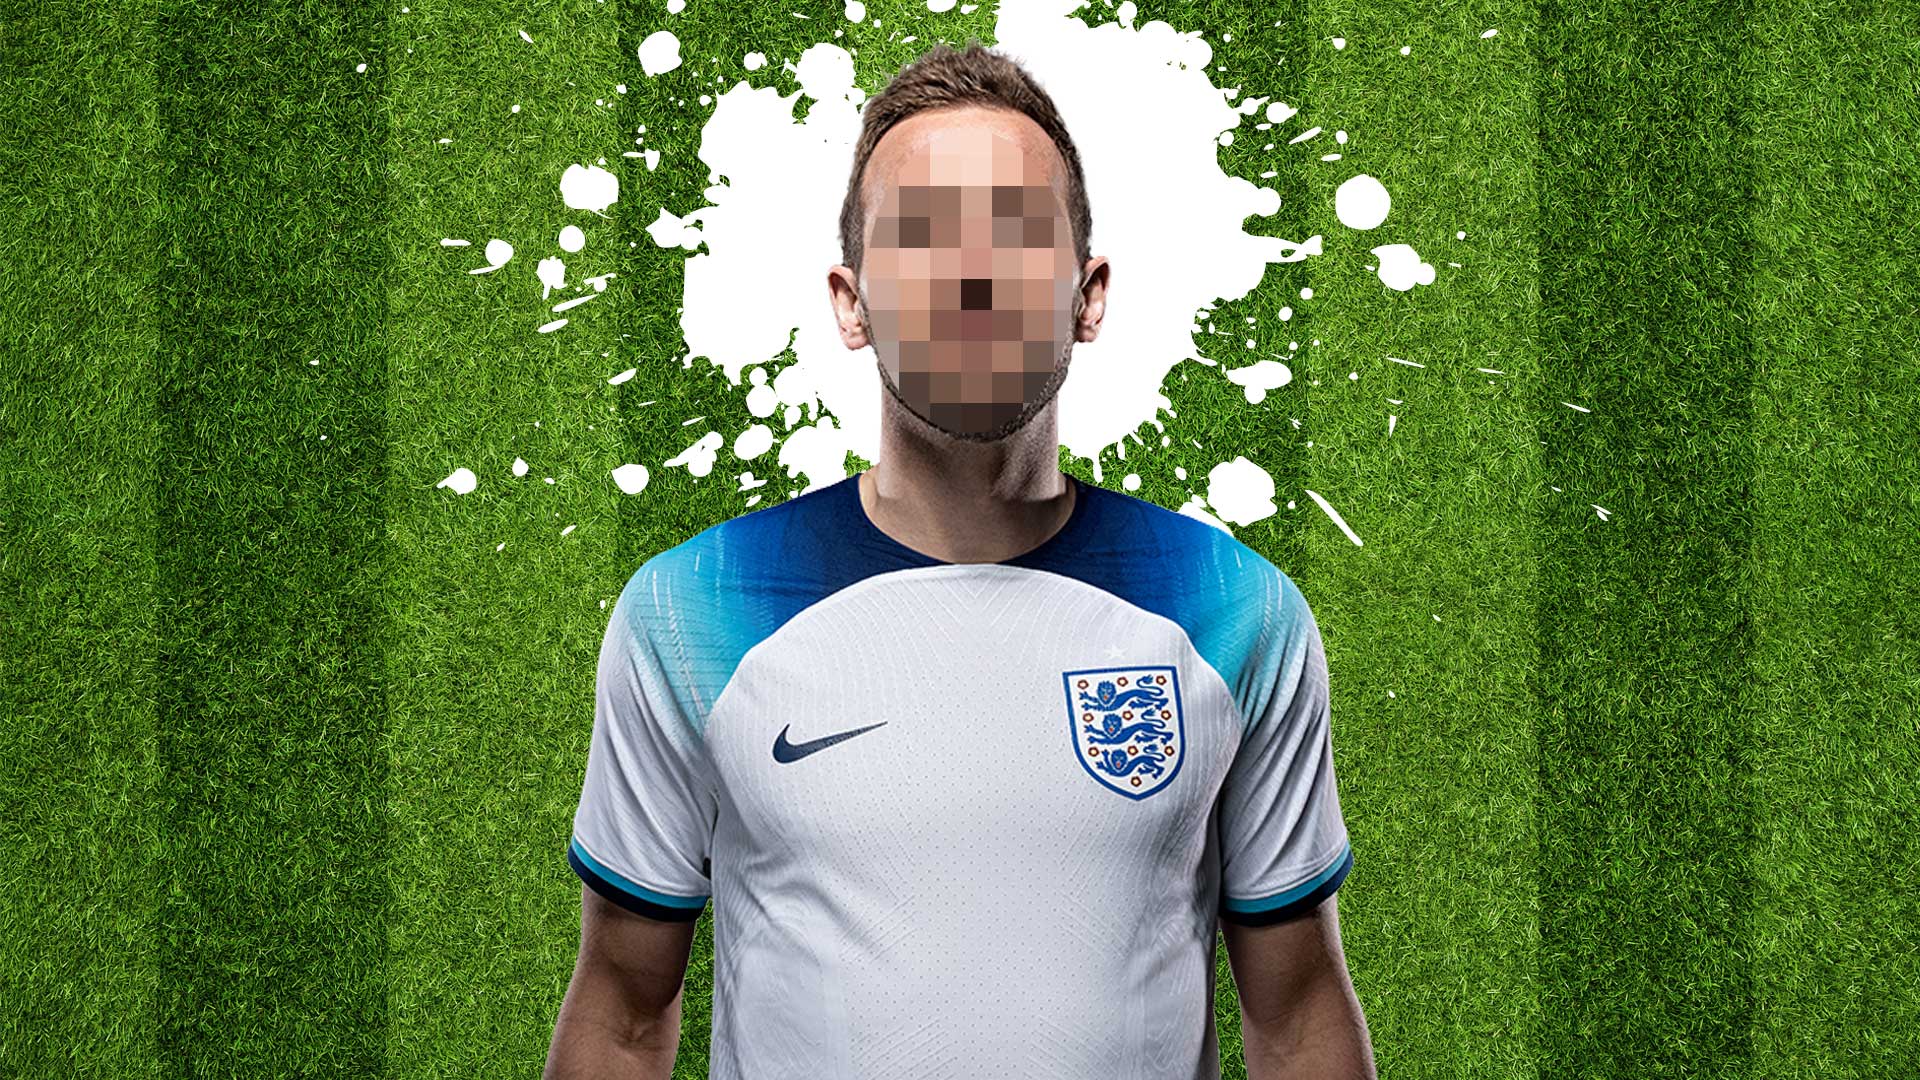 The Football Arena - Guess the player by club logos.